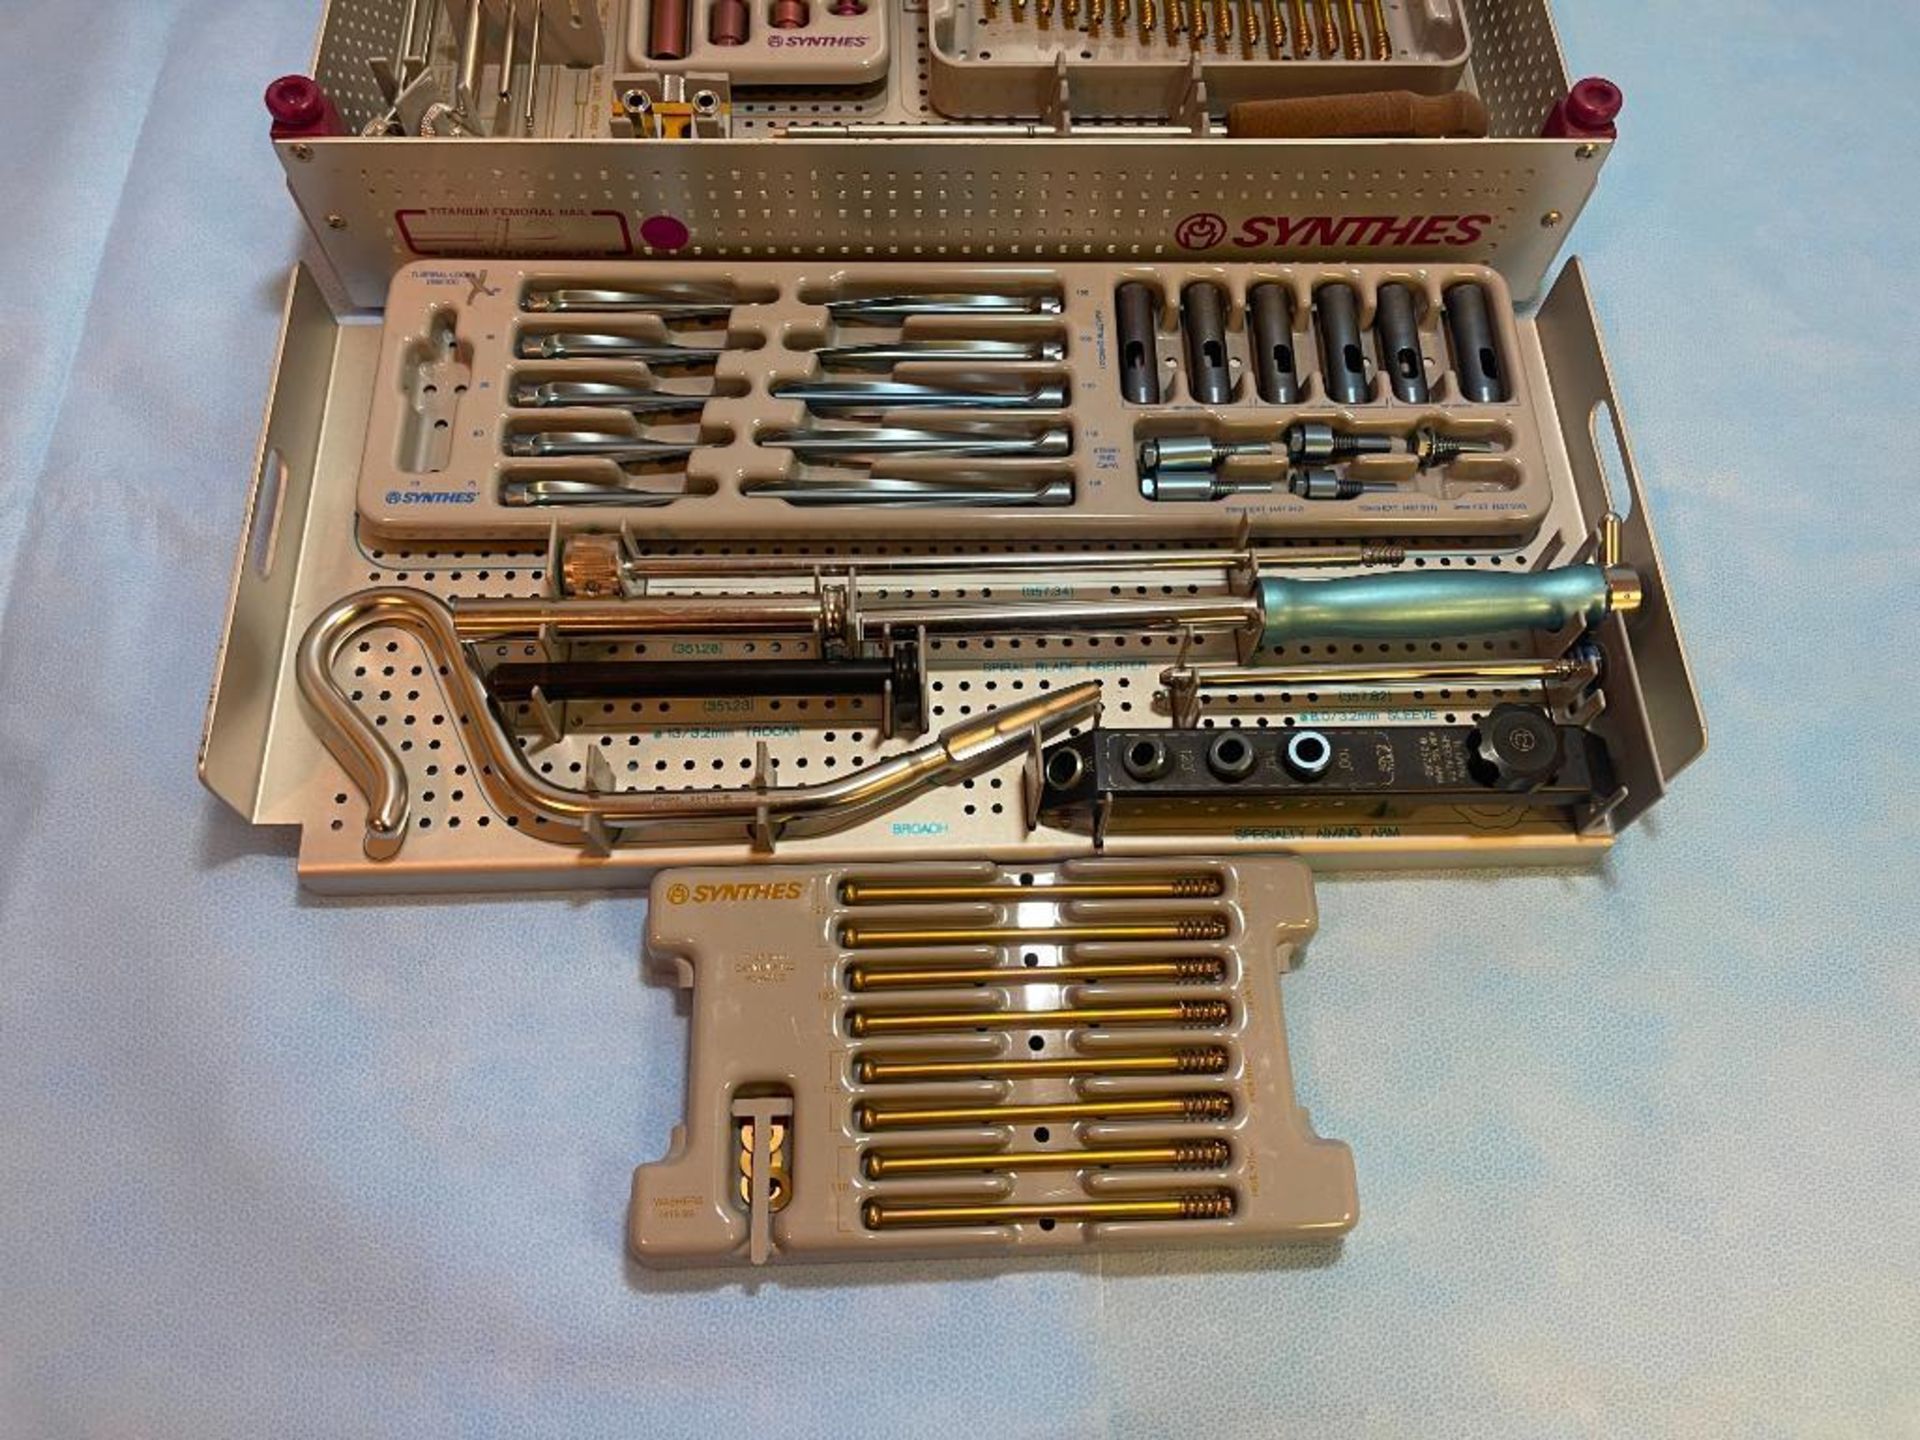 SYNTHES TI FEMORAL NAIL SPECIALTY LOCKING SET - Image 2 of 2